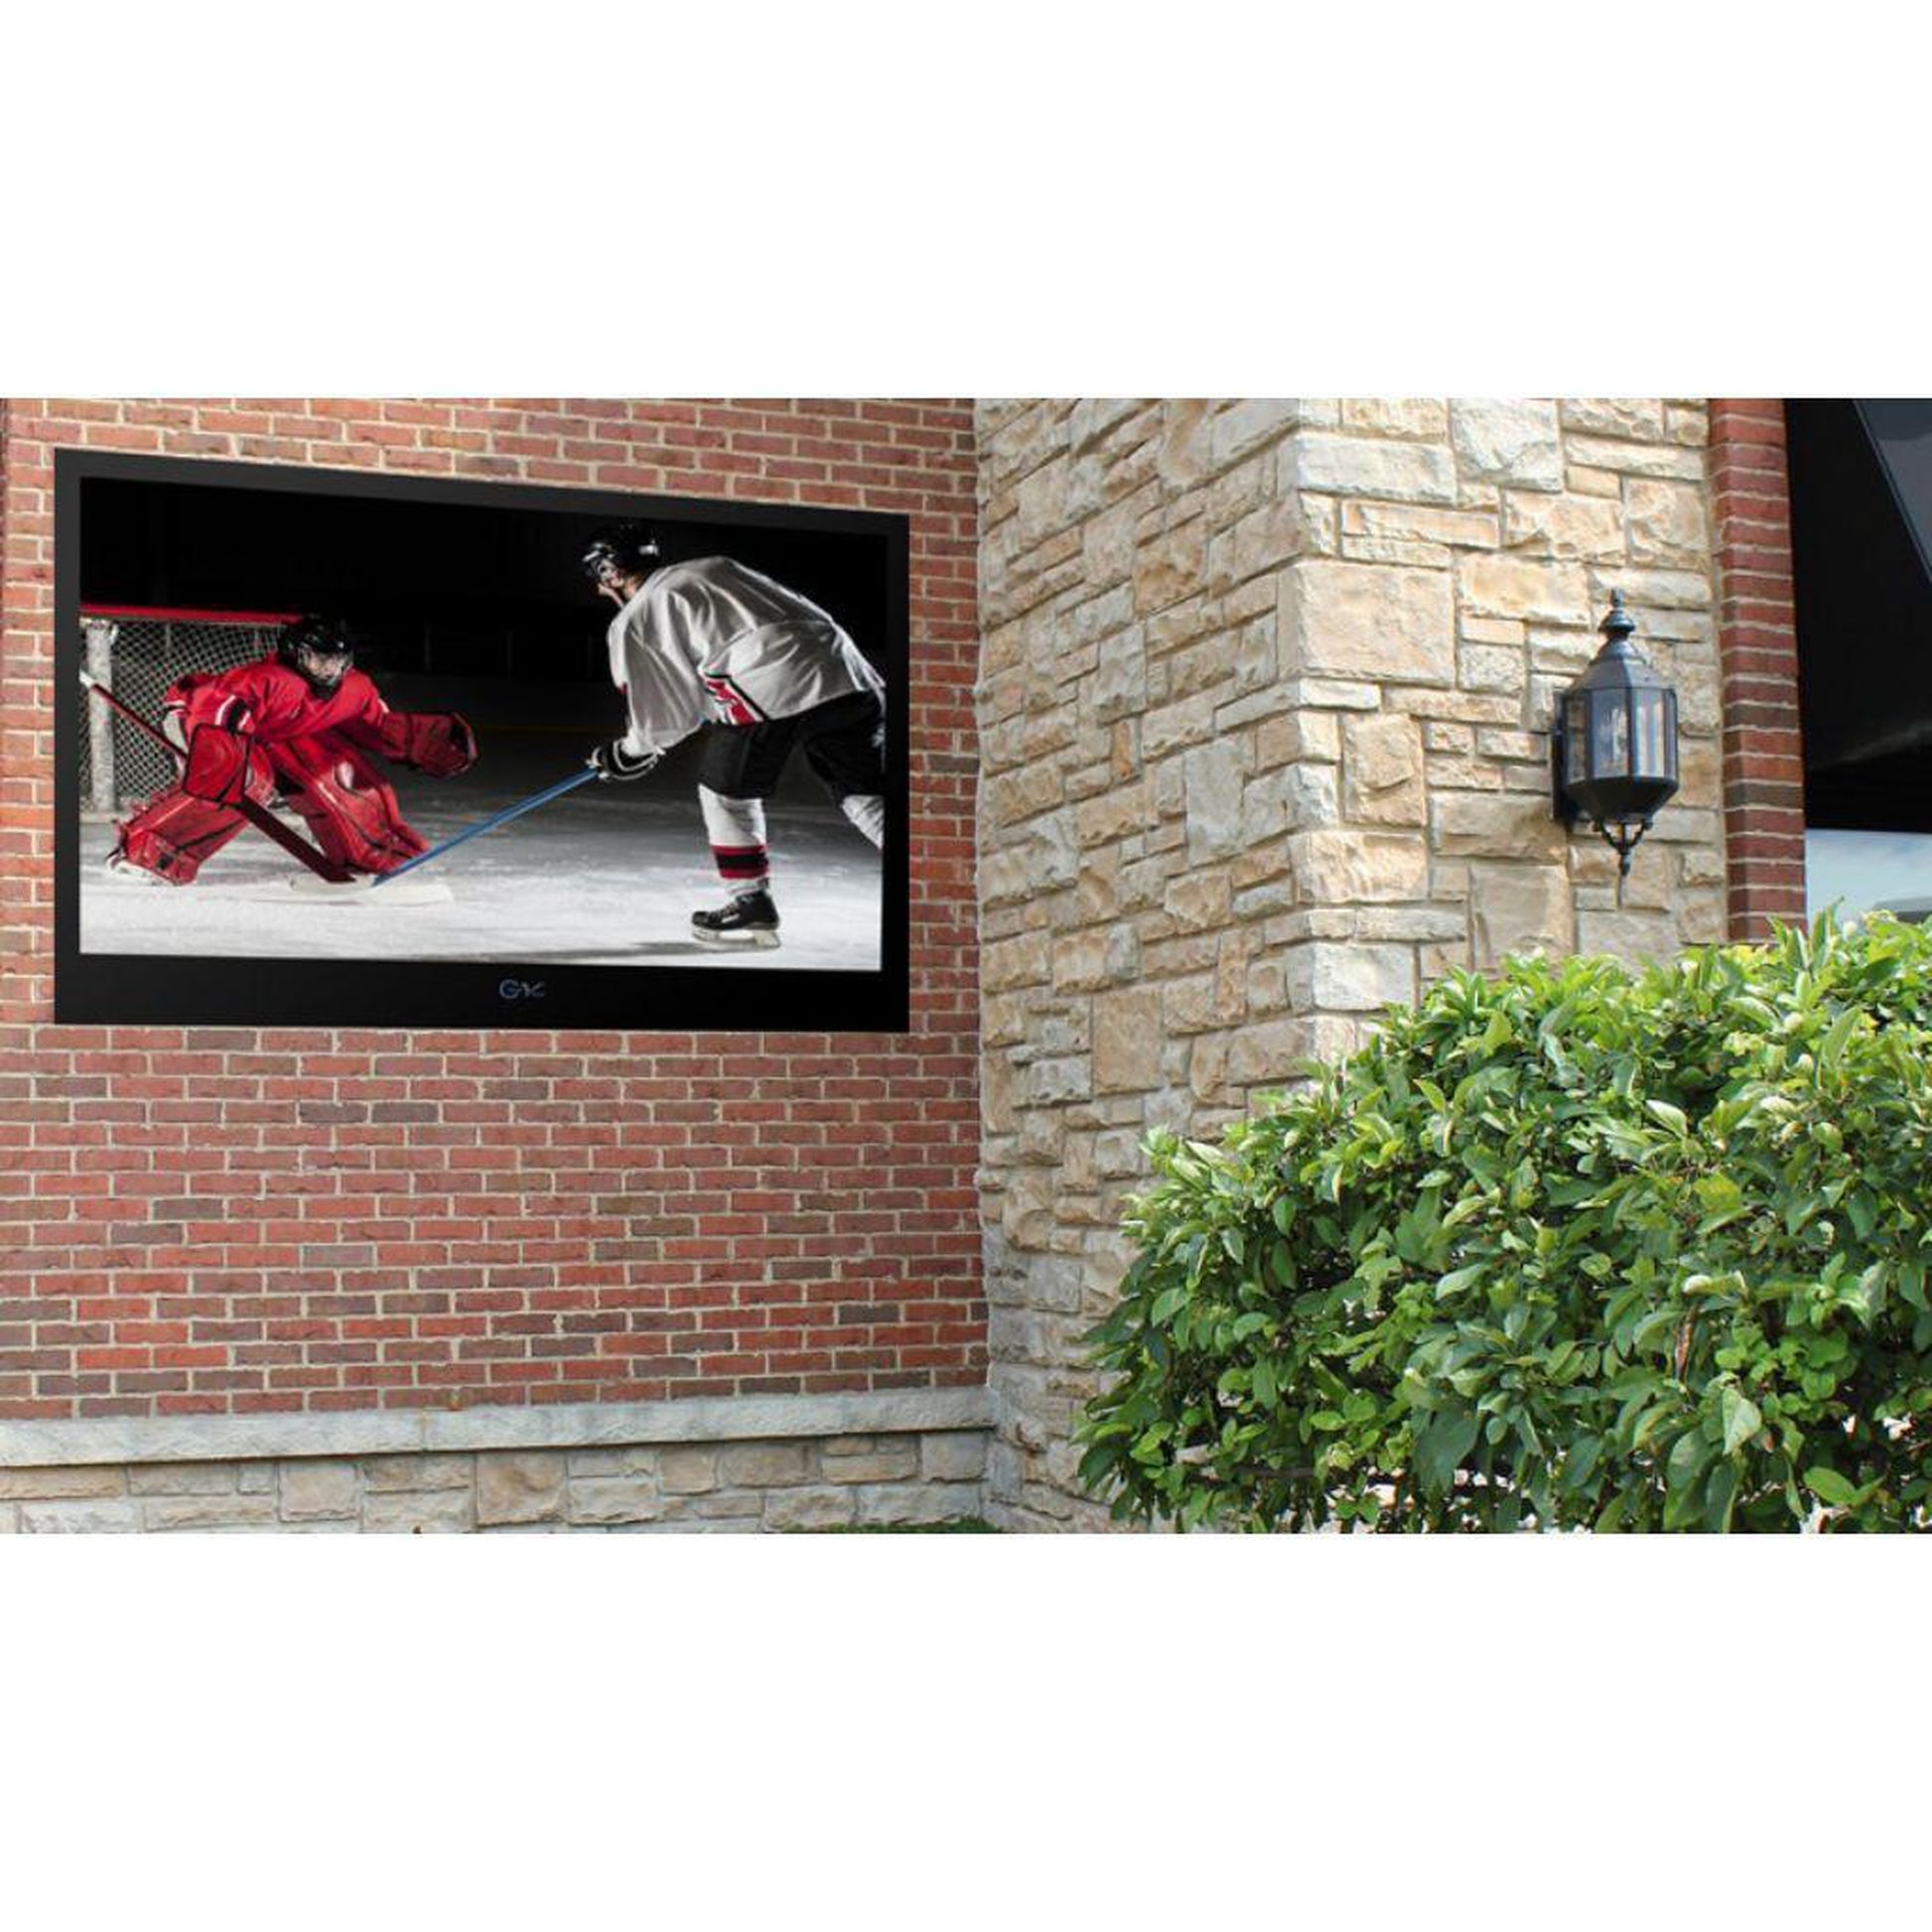 ClearView Pro-High-Brite 55" Sunlight Readable Outdoor HDTV LED - Silver Metal Finish